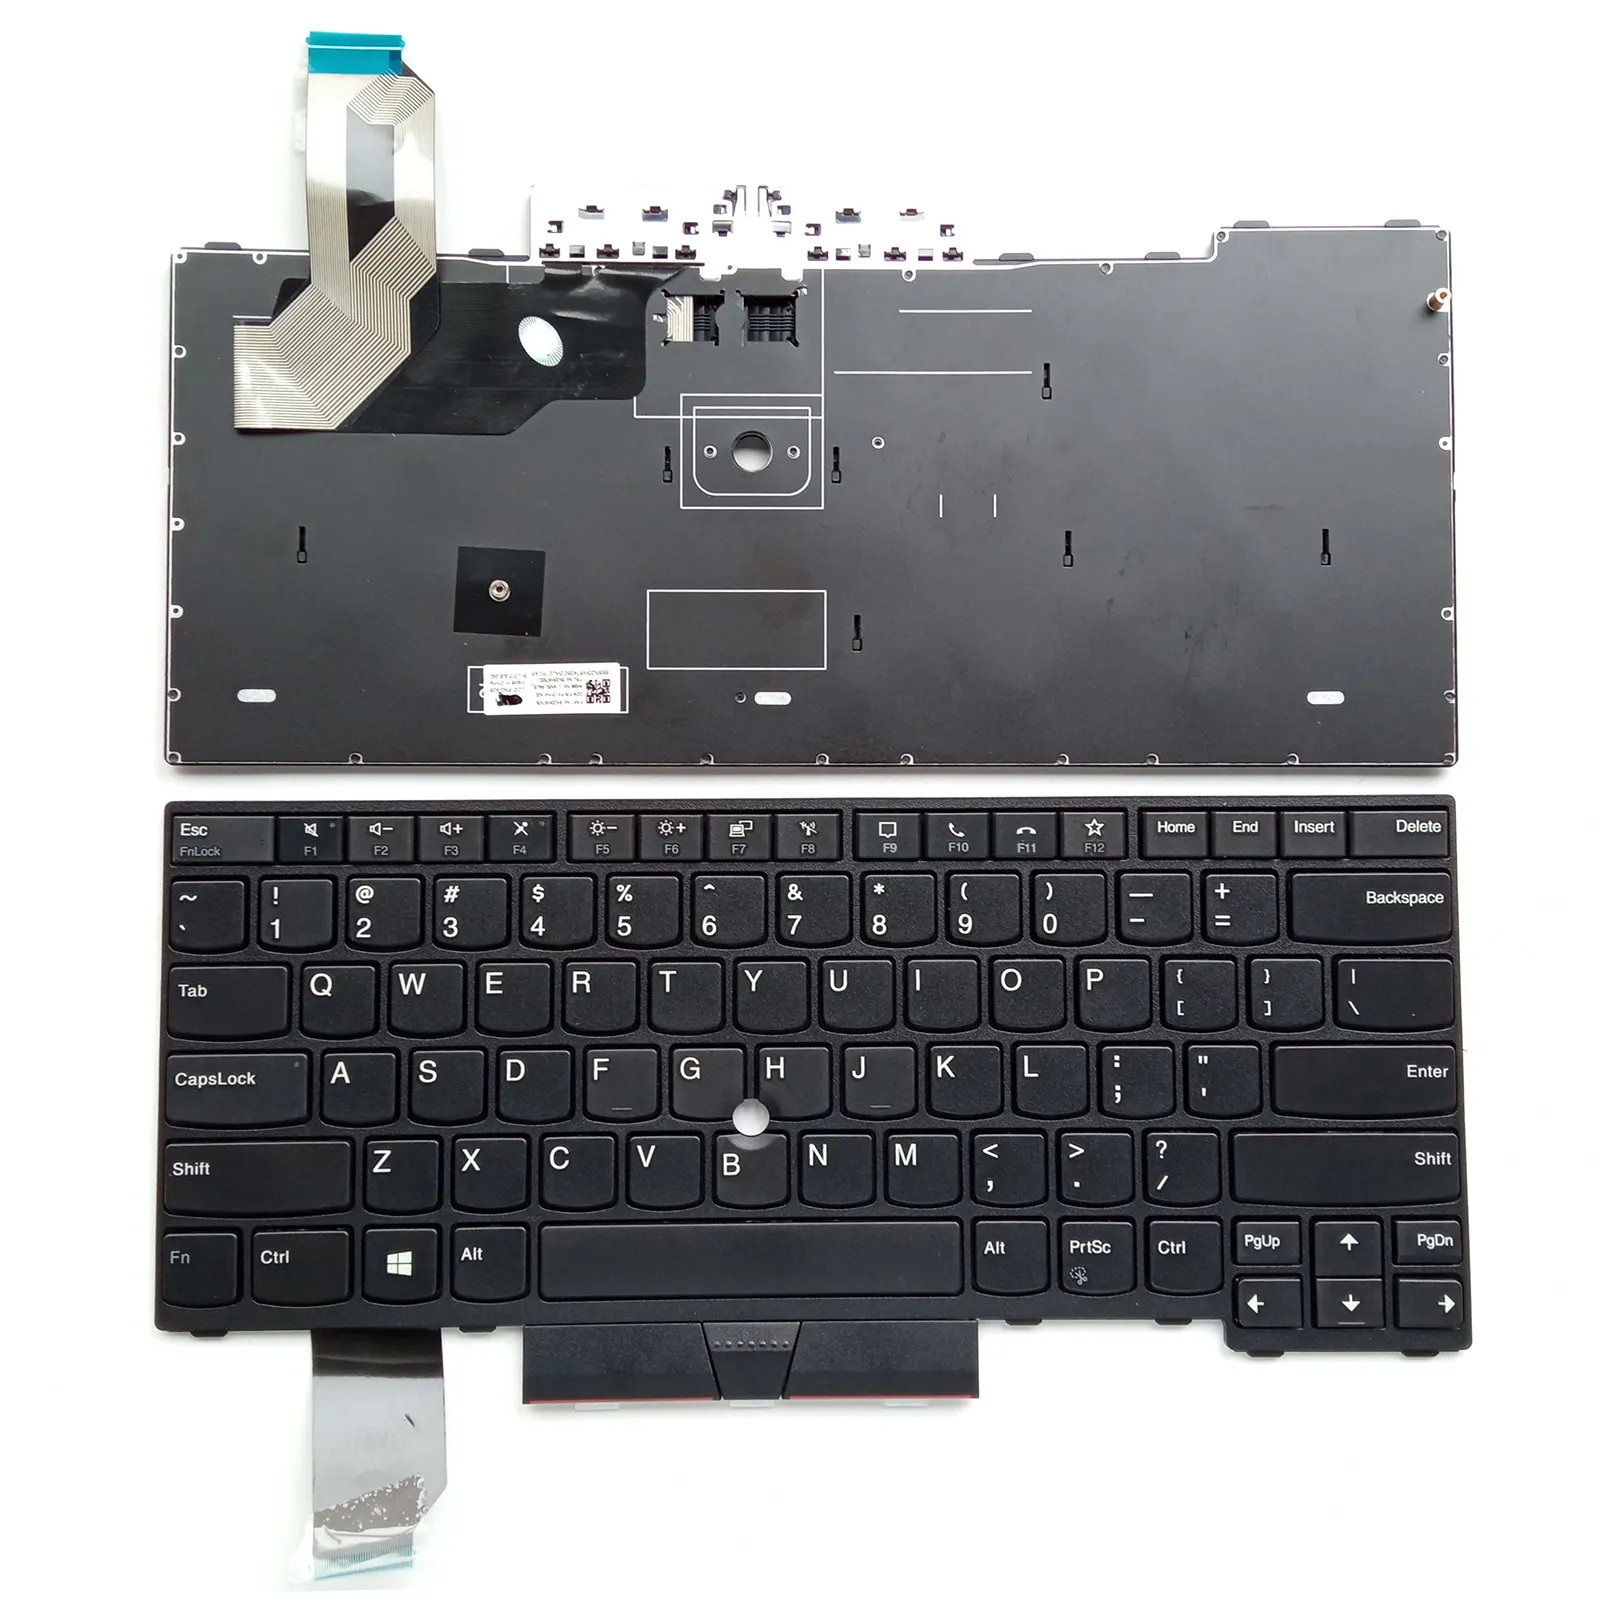 Keyboard US Black Keyboard For ThinkPad L14 GEN 2 Type 20X5 20X6 20X1 20X2 Without Pointing